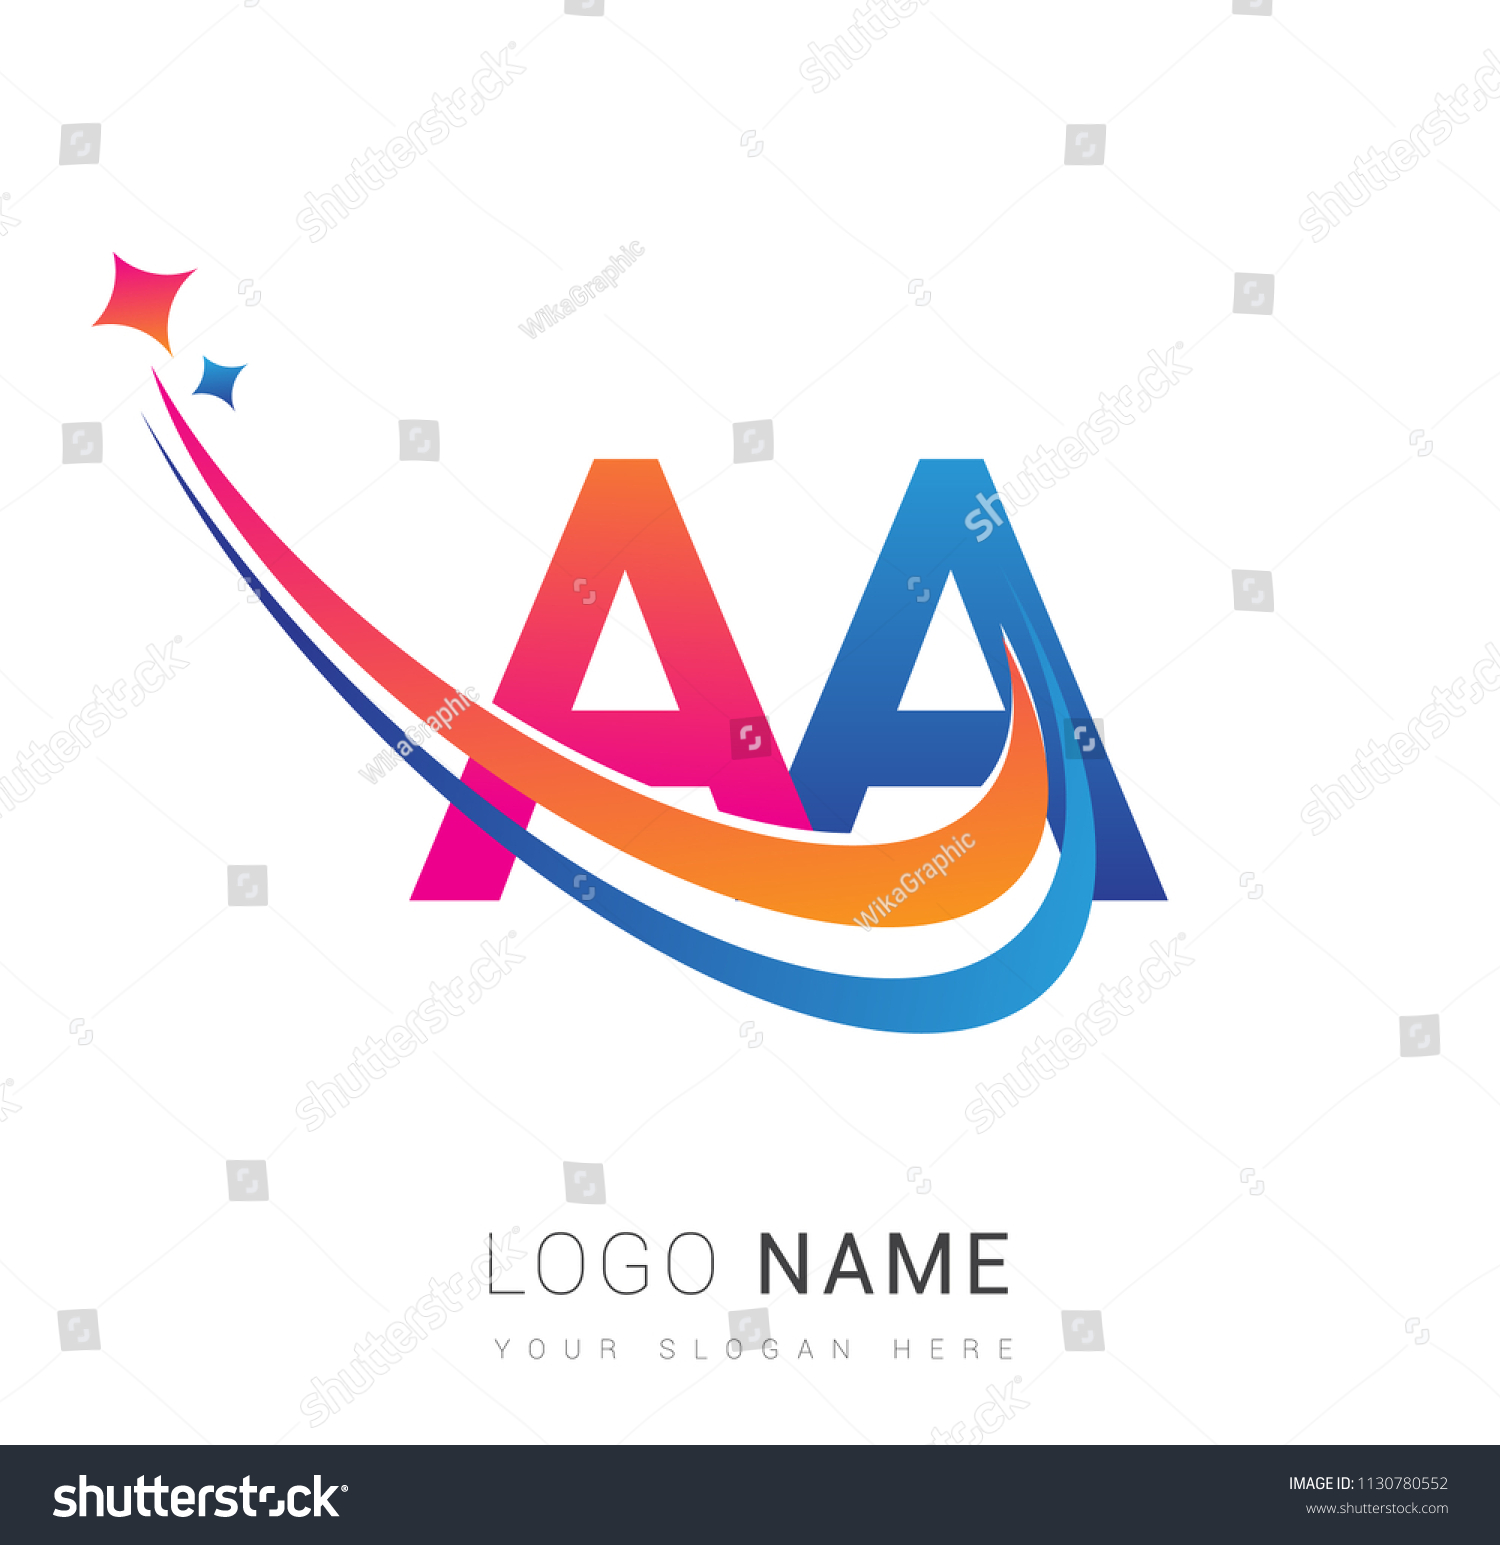 Initial Letter Logotype Company Name Stock Vector Royalty Free